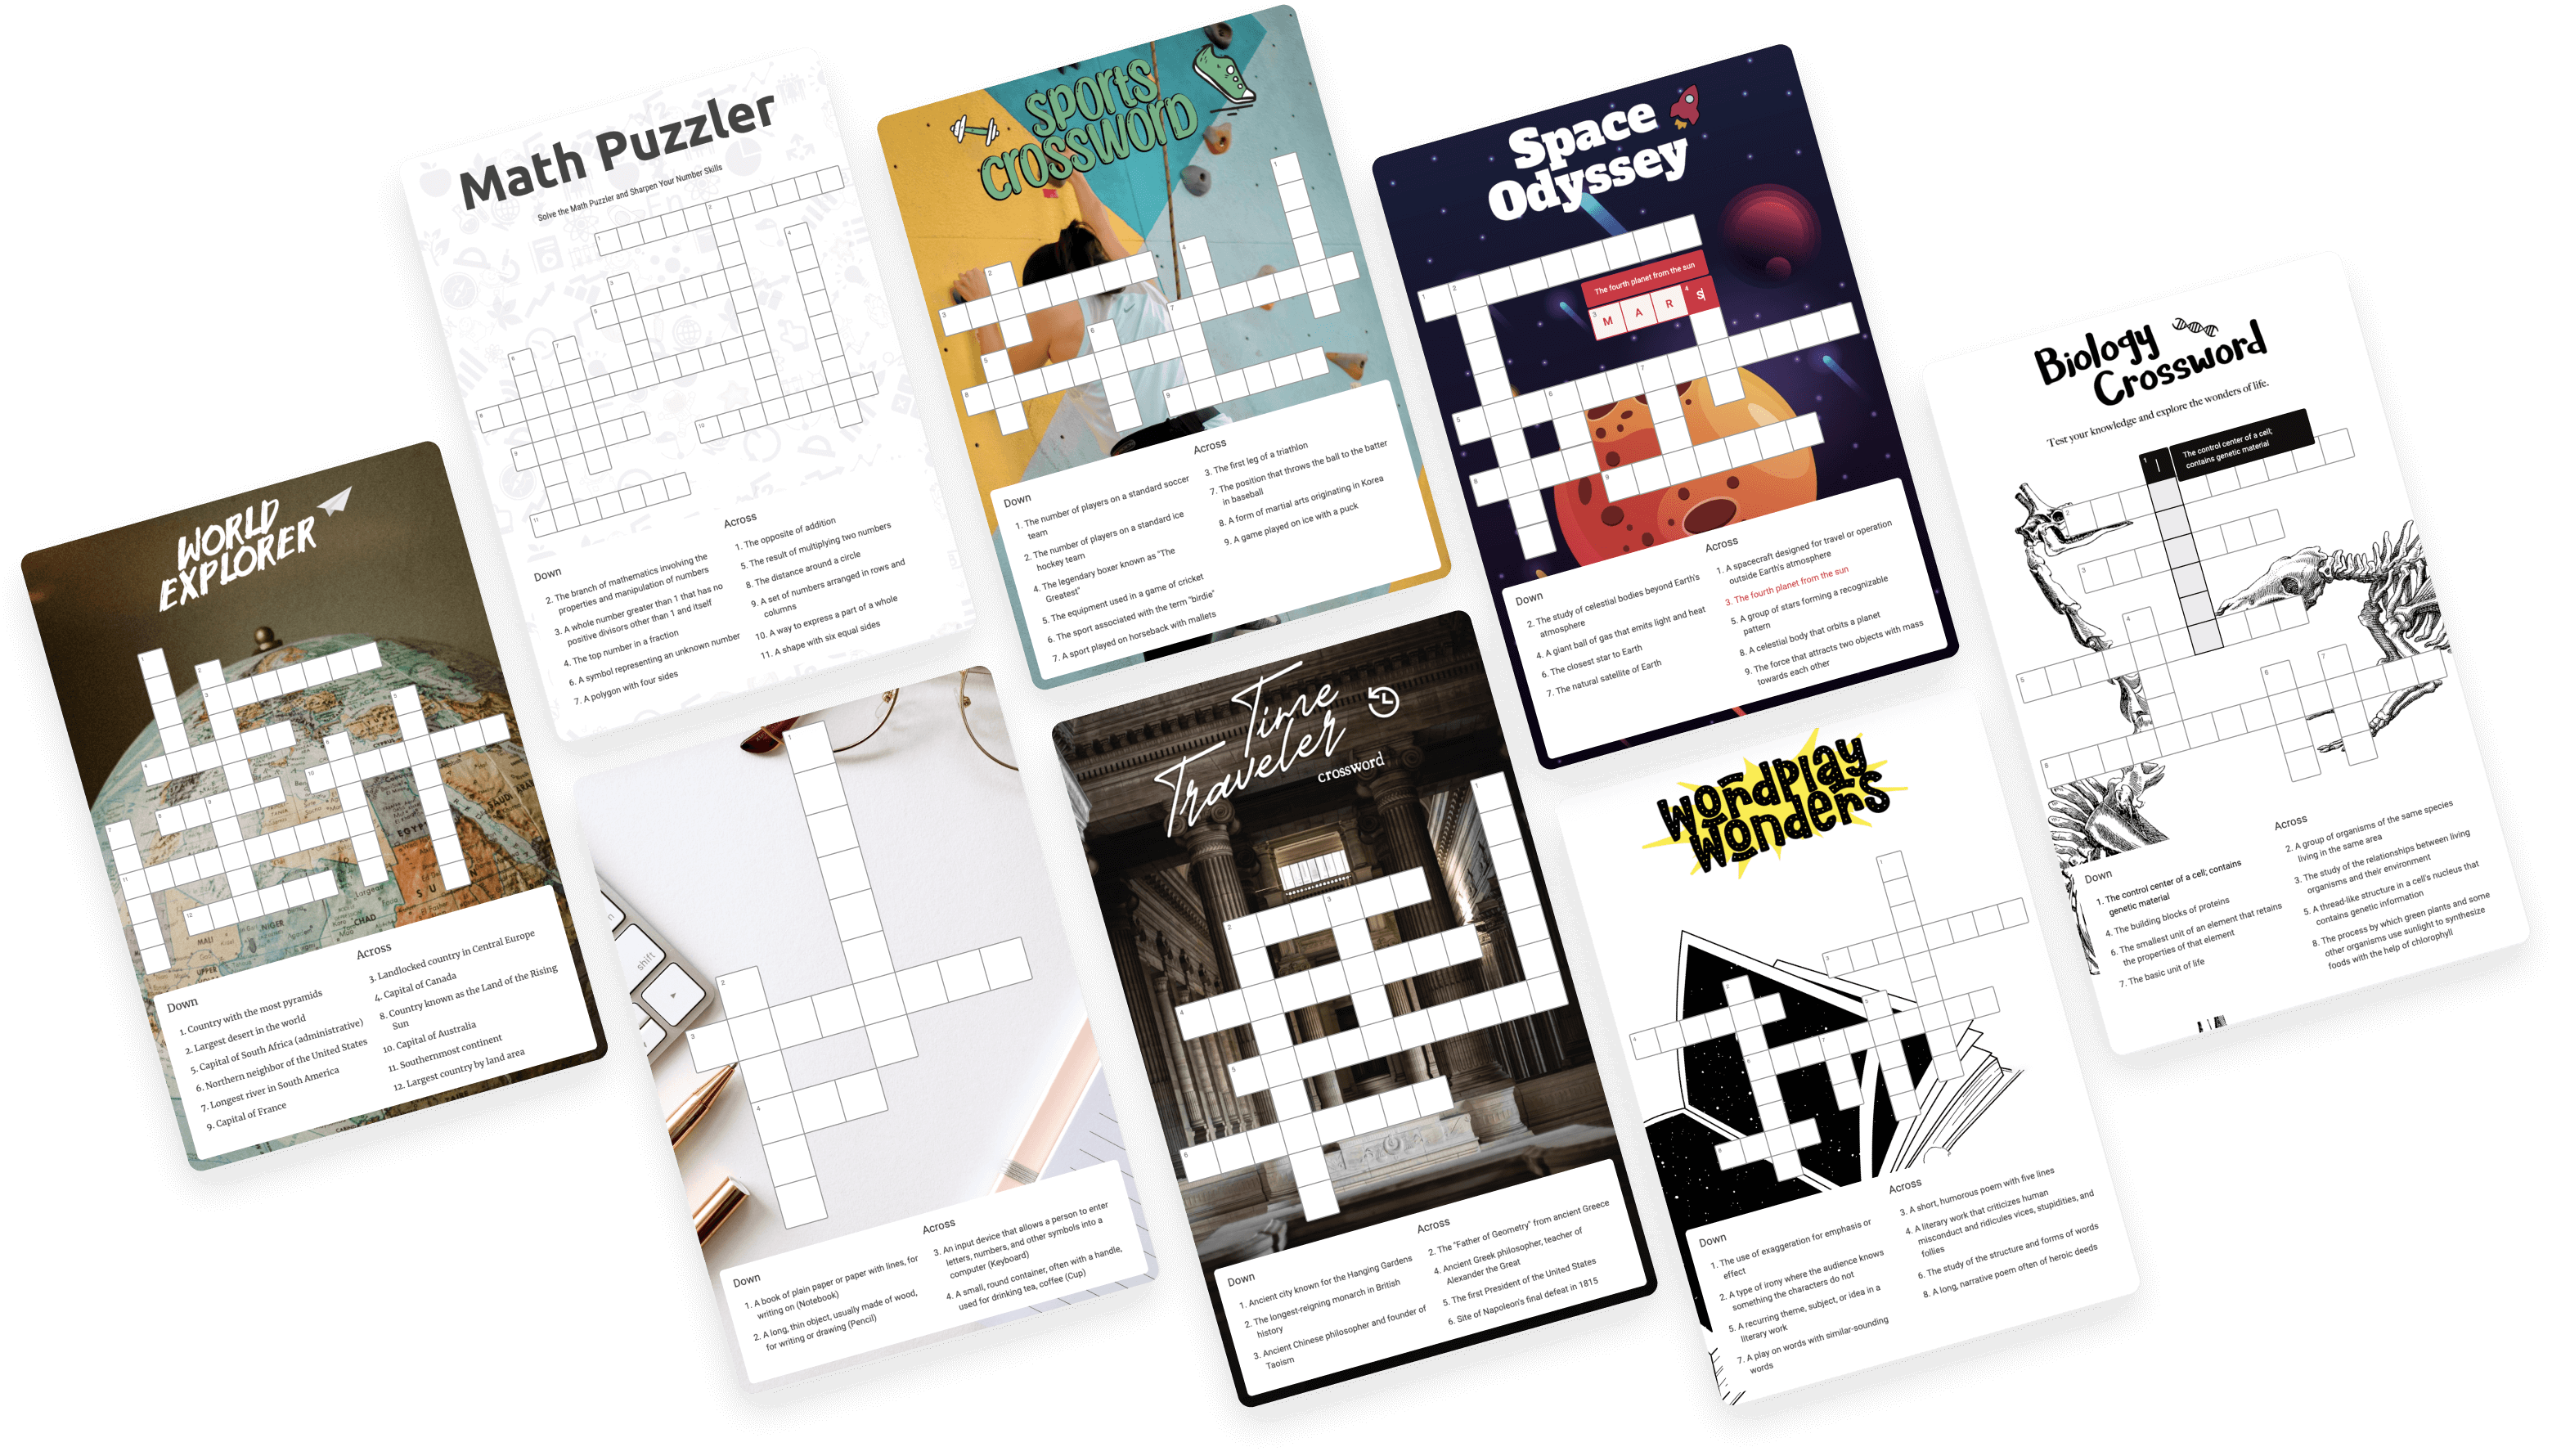 Posters with Interacty projects based on mechanics "クロスワード・パズル"